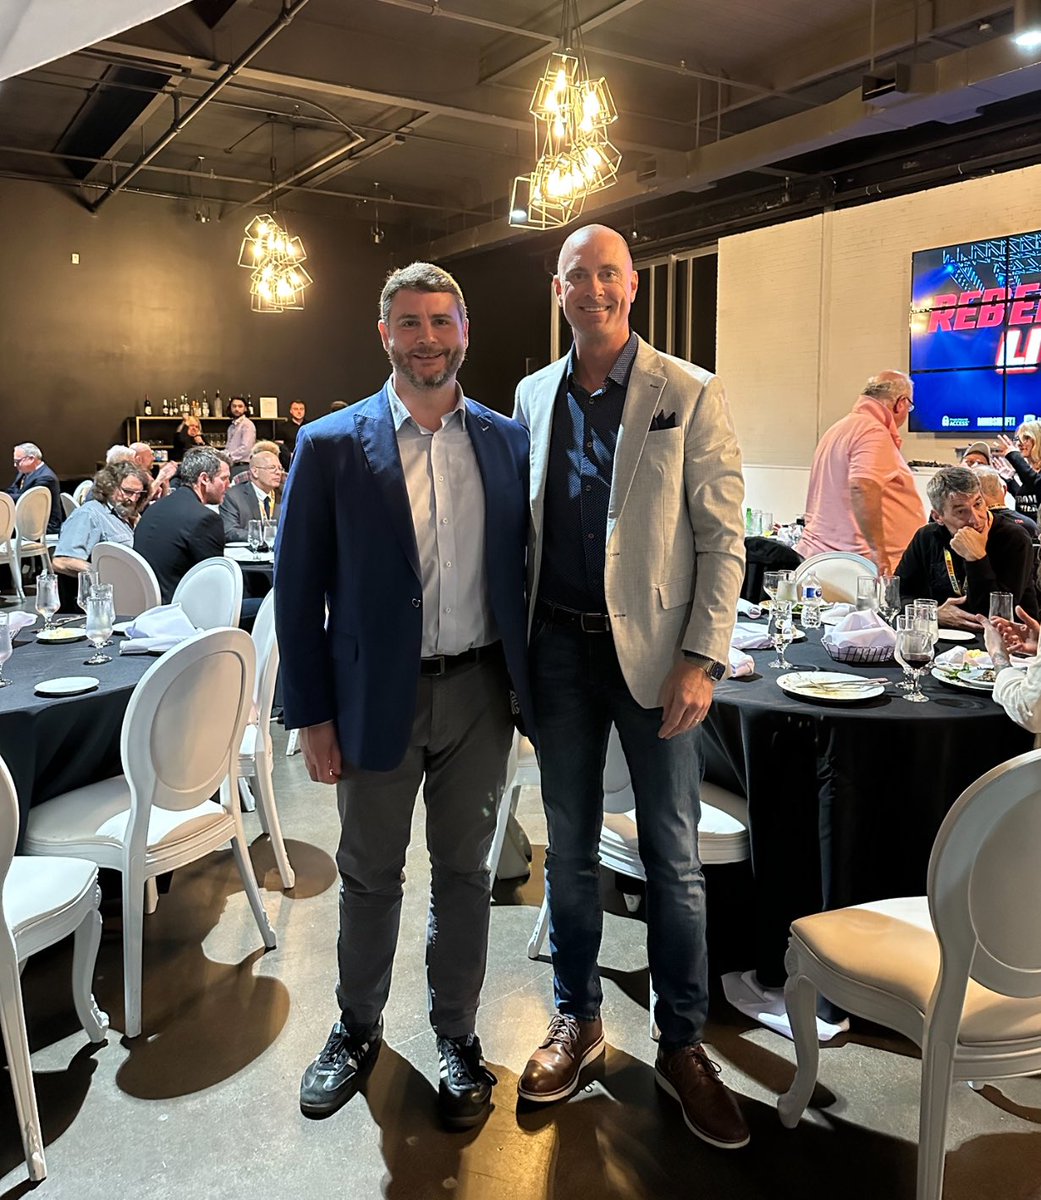 I got to hang with the great @ConceptualJames today, and so many other powerful people working to reverse our cultural decline. Thank you to @RebelNews_CA for inviting me to speak at your Toronto conference.